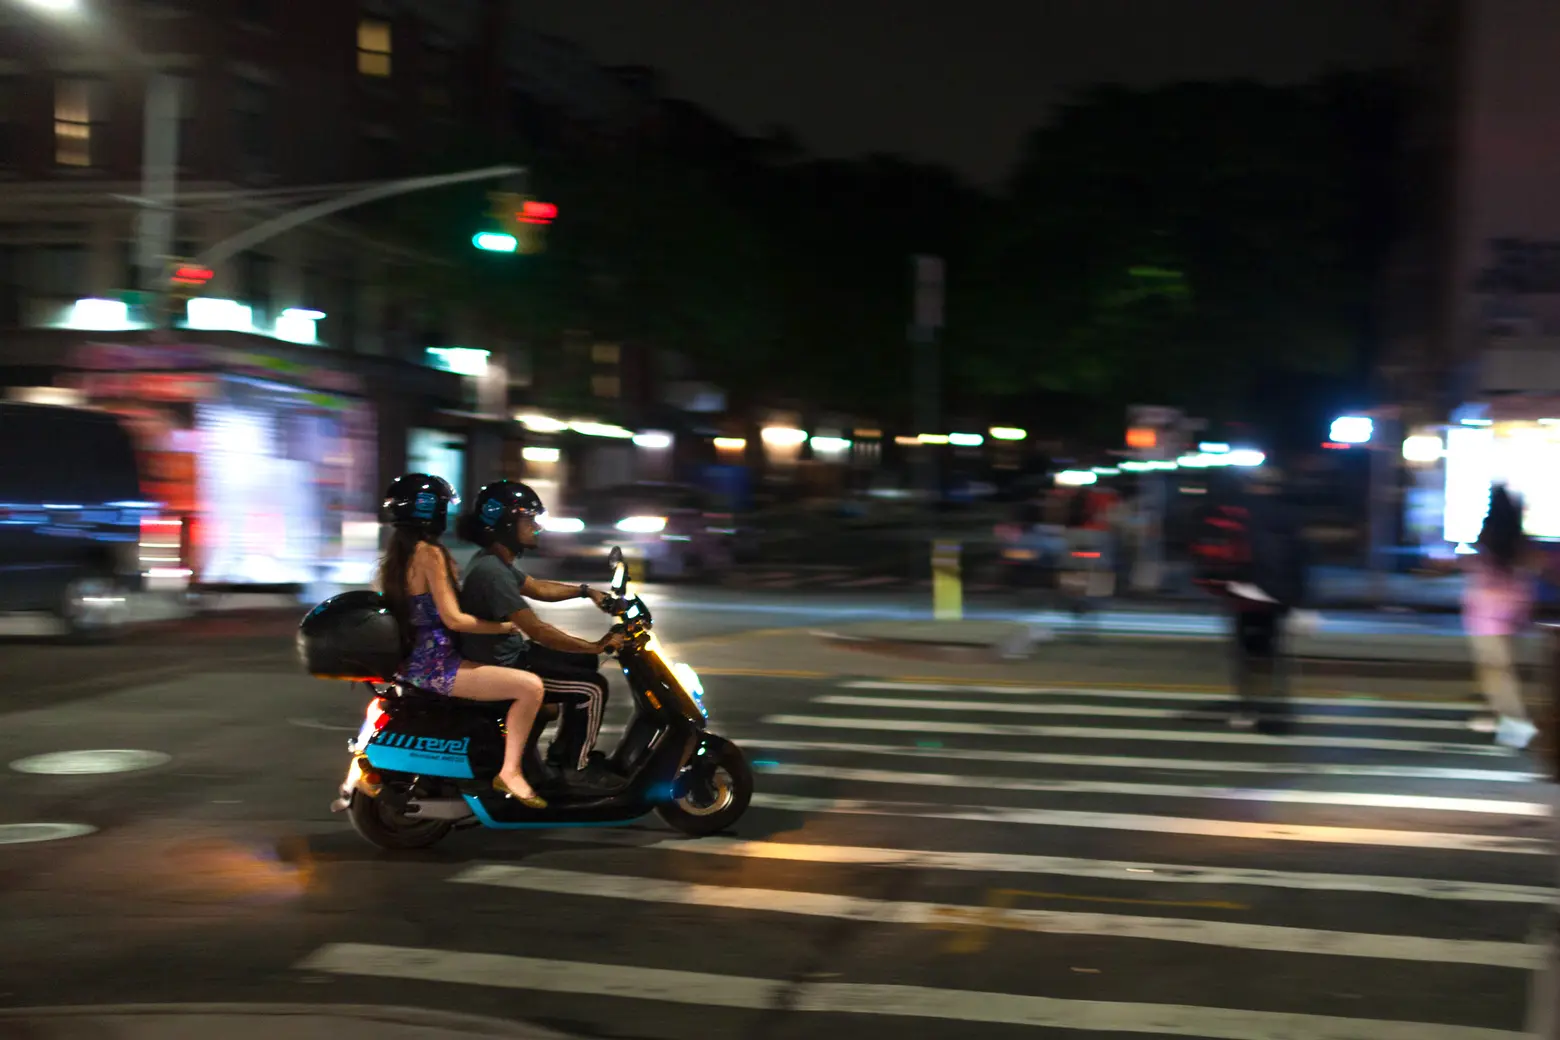 Revel electric mopeds return to NYC with strict safety rules